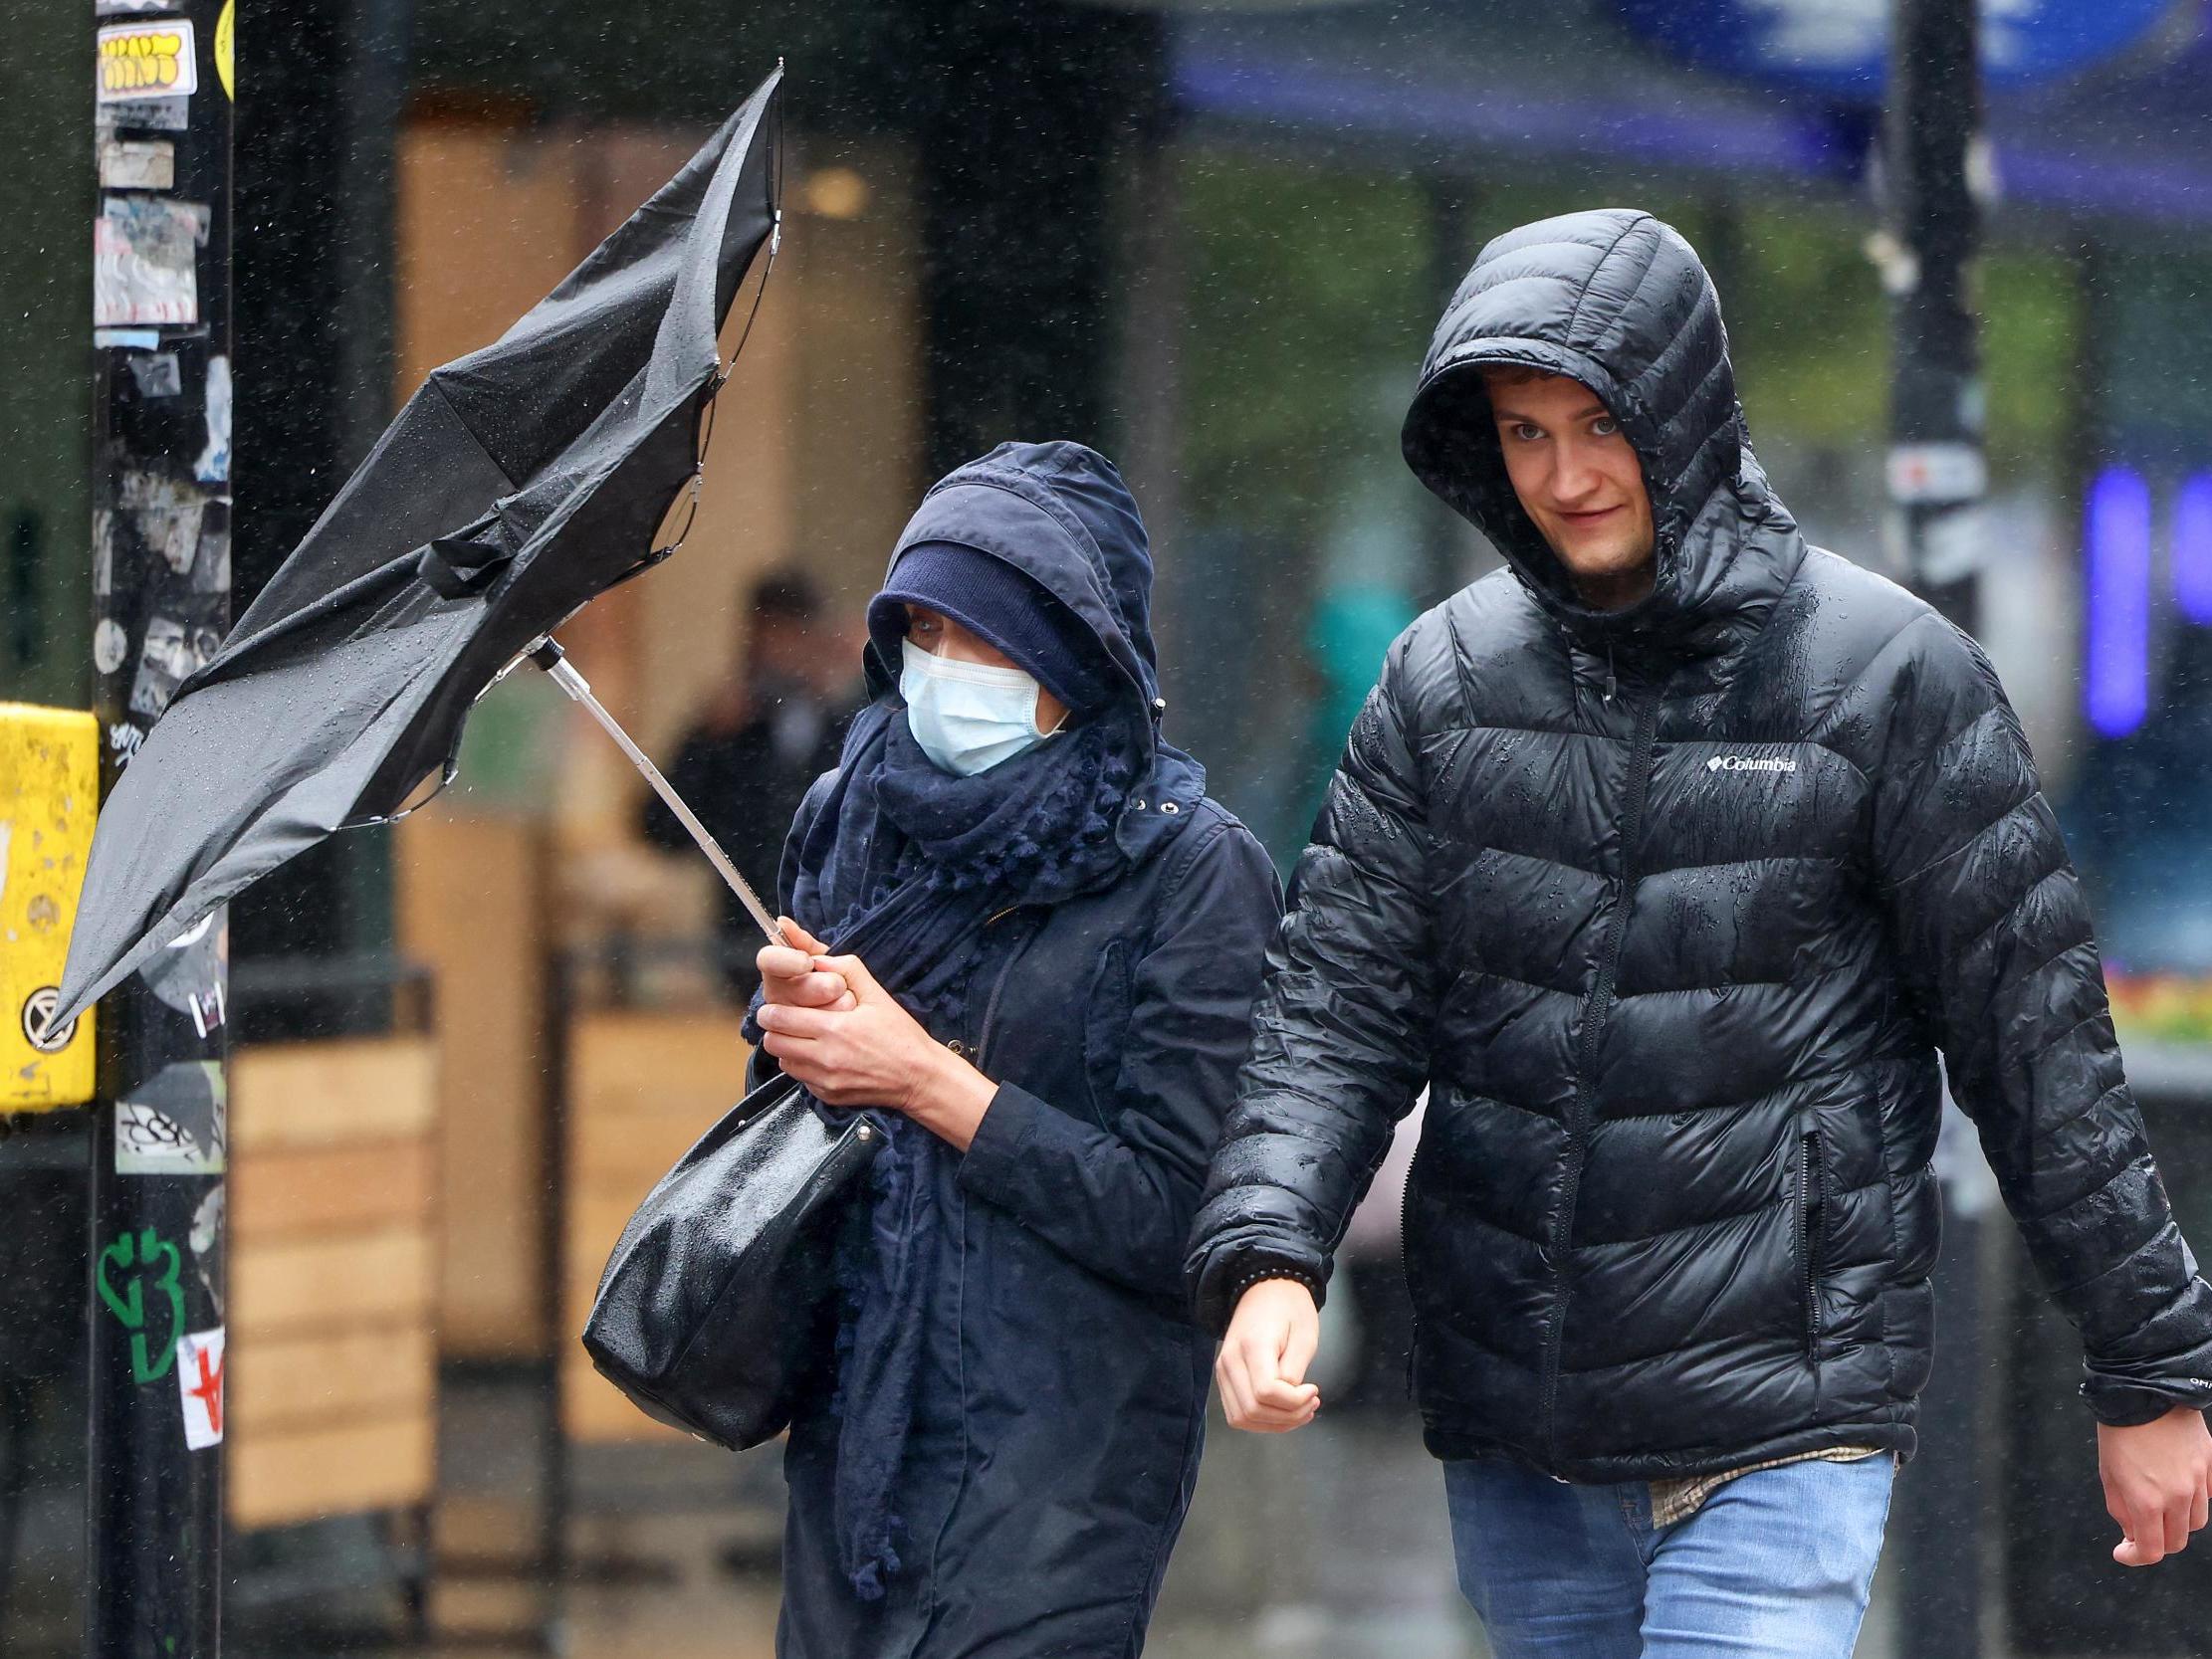 UK weather: The latest Met Office forecast